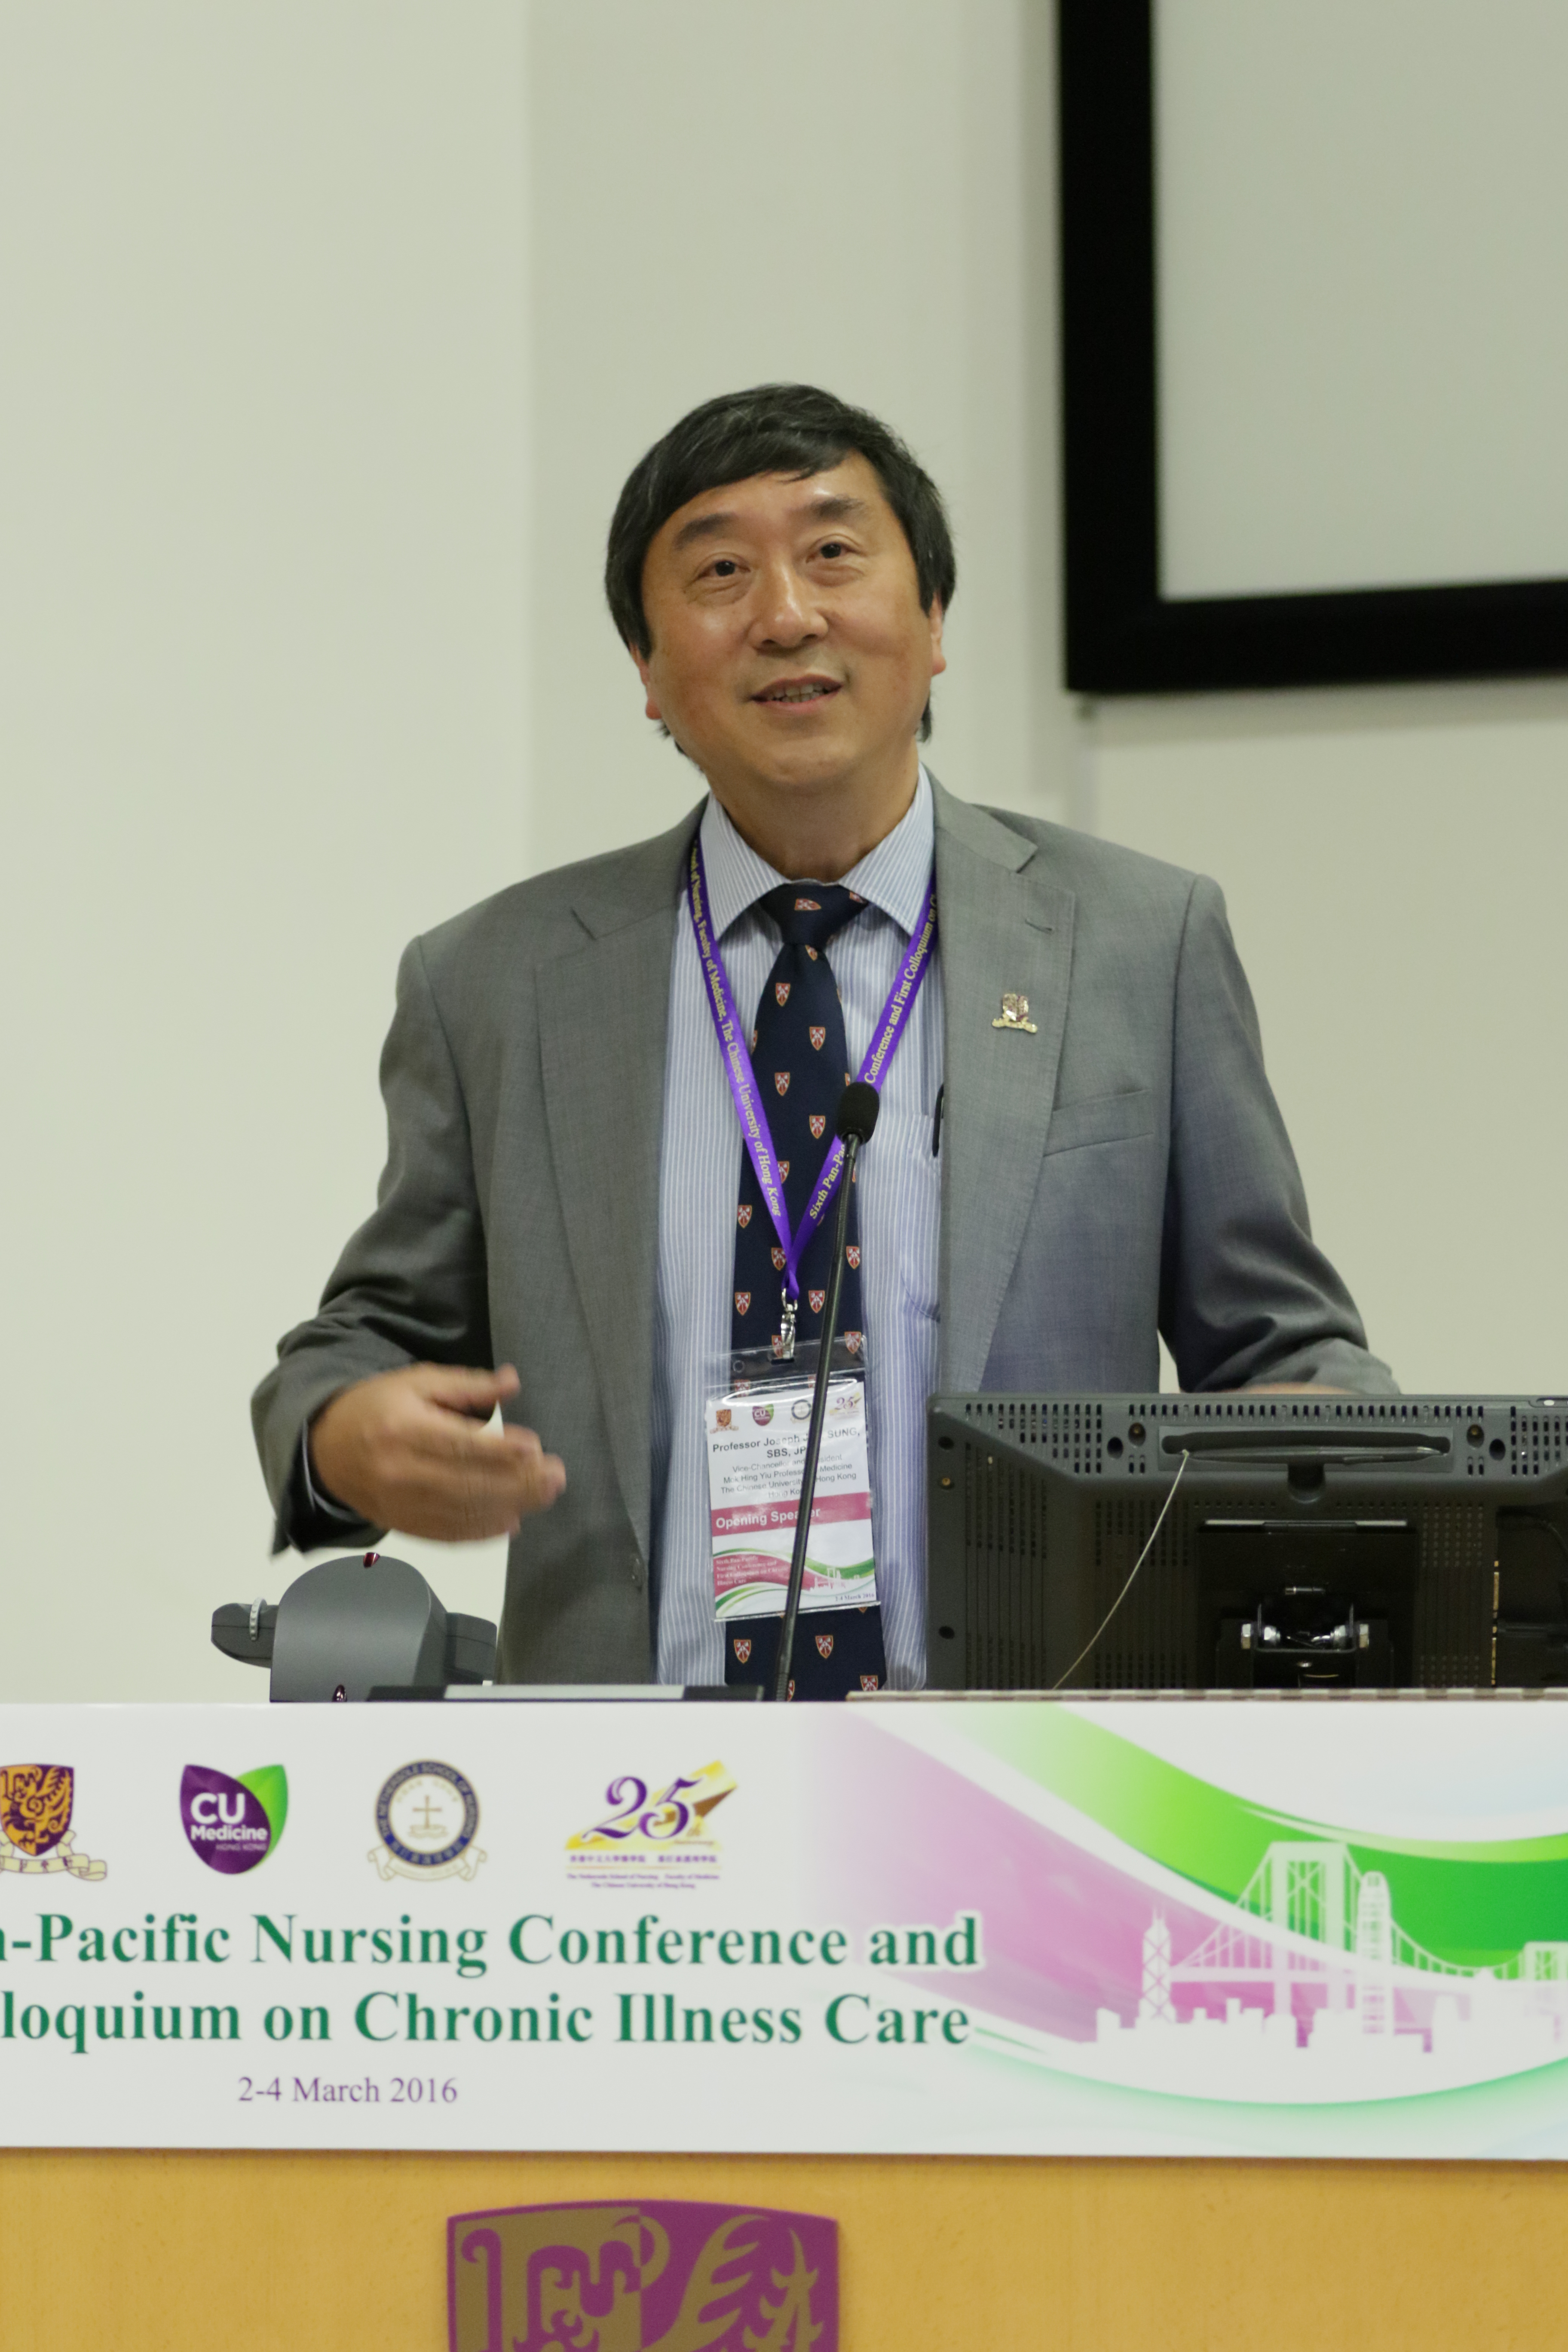 Prof. Joseph Sung delivers an opening address